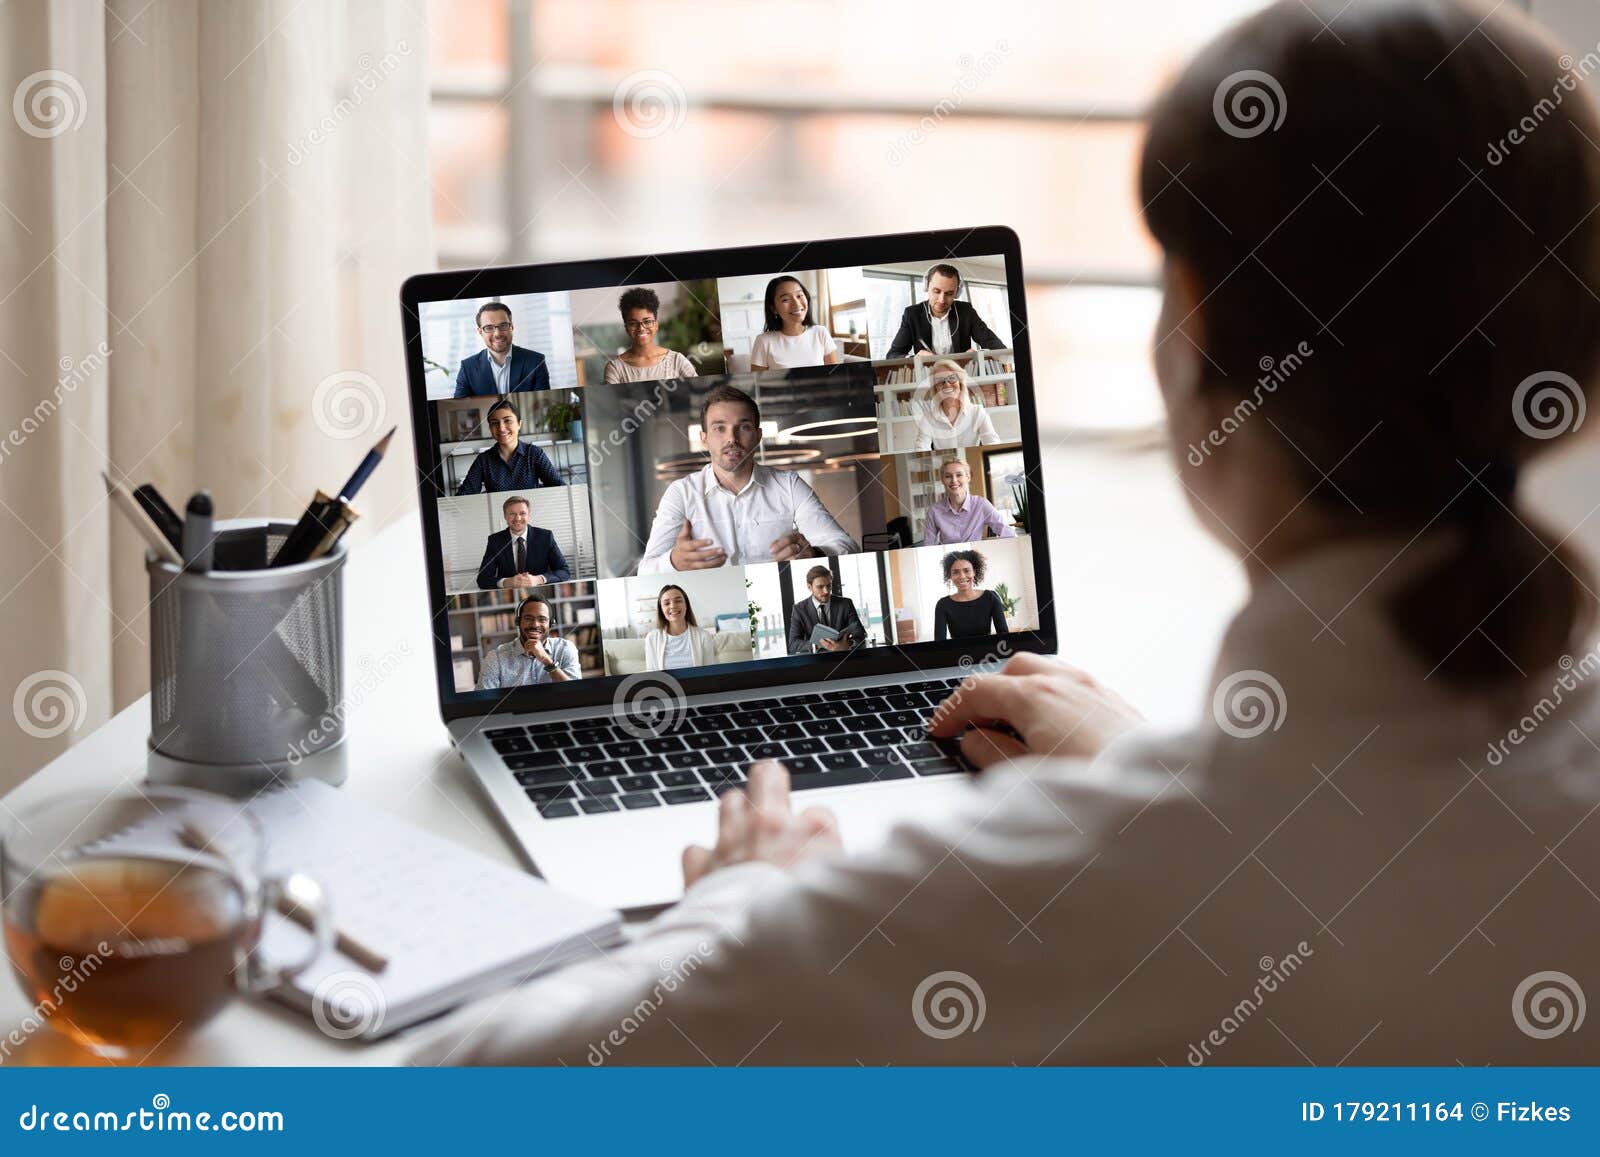 on laptop diverse people collage webcam view over woman shoulder